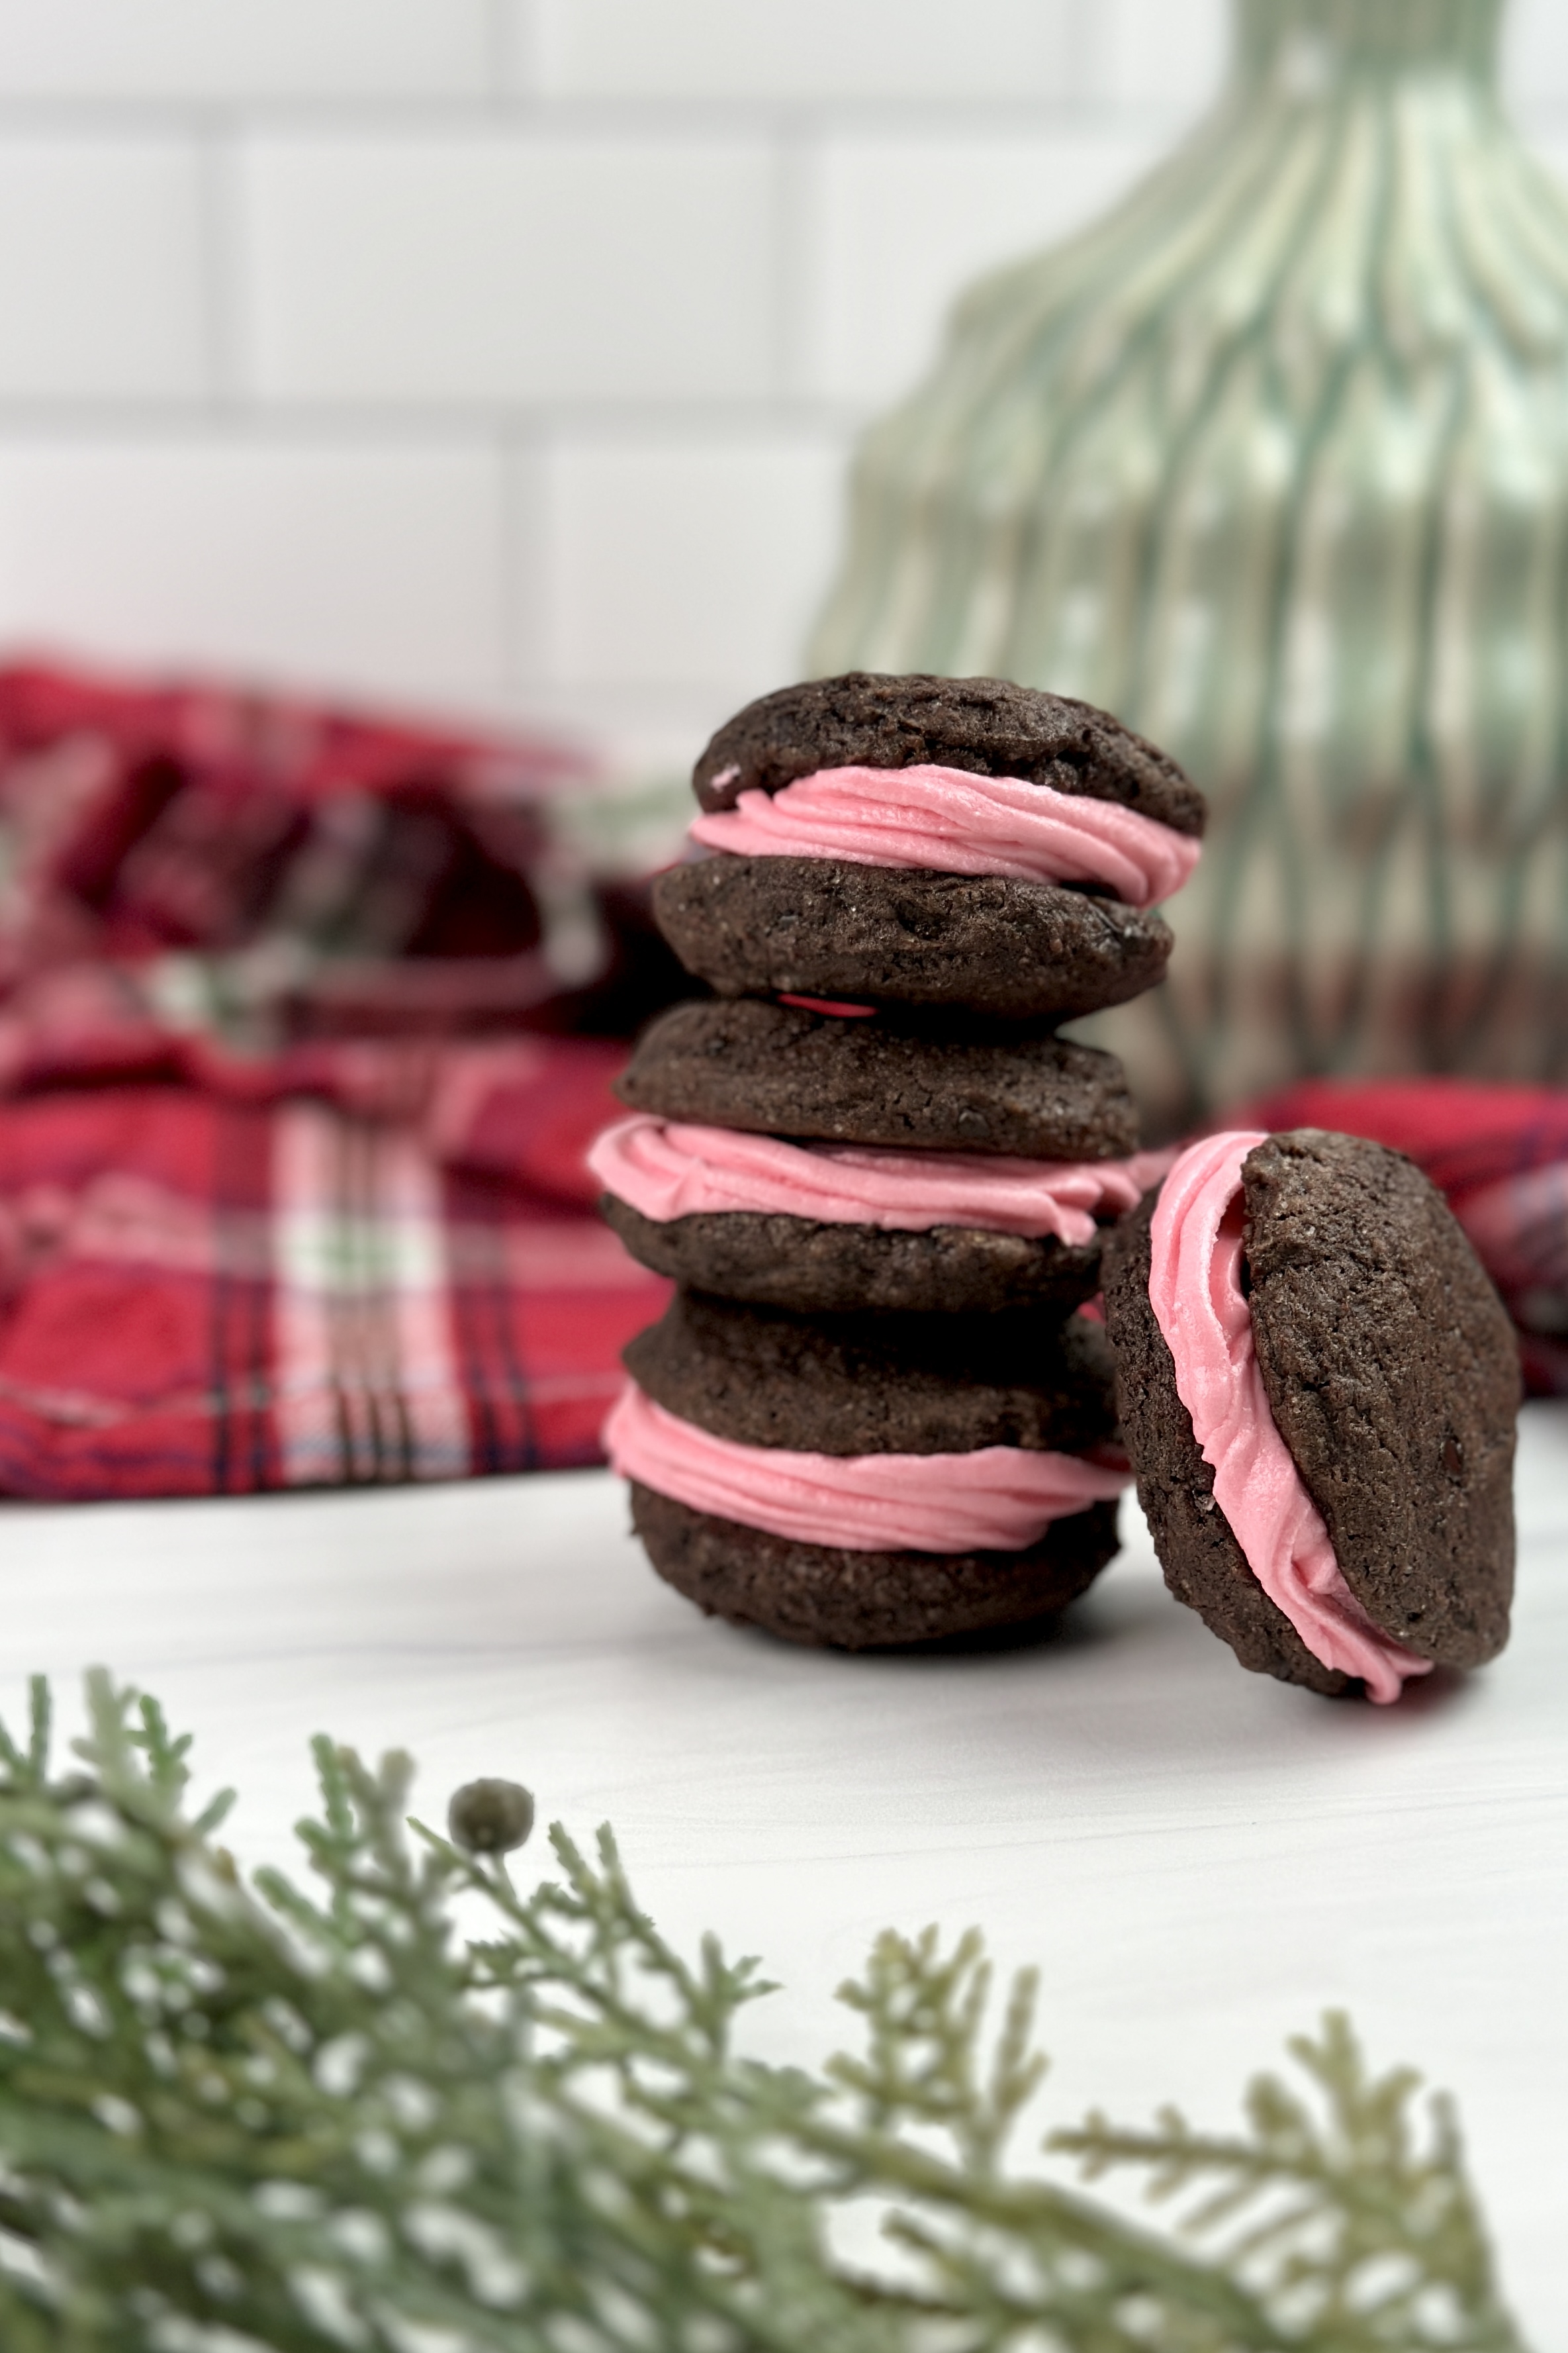 Everyone will love these delicious peppermint chocolate sandwich cookies this holiday season. The decadent chocolate cookies and creamy peppermint frosting are the perfect combination.